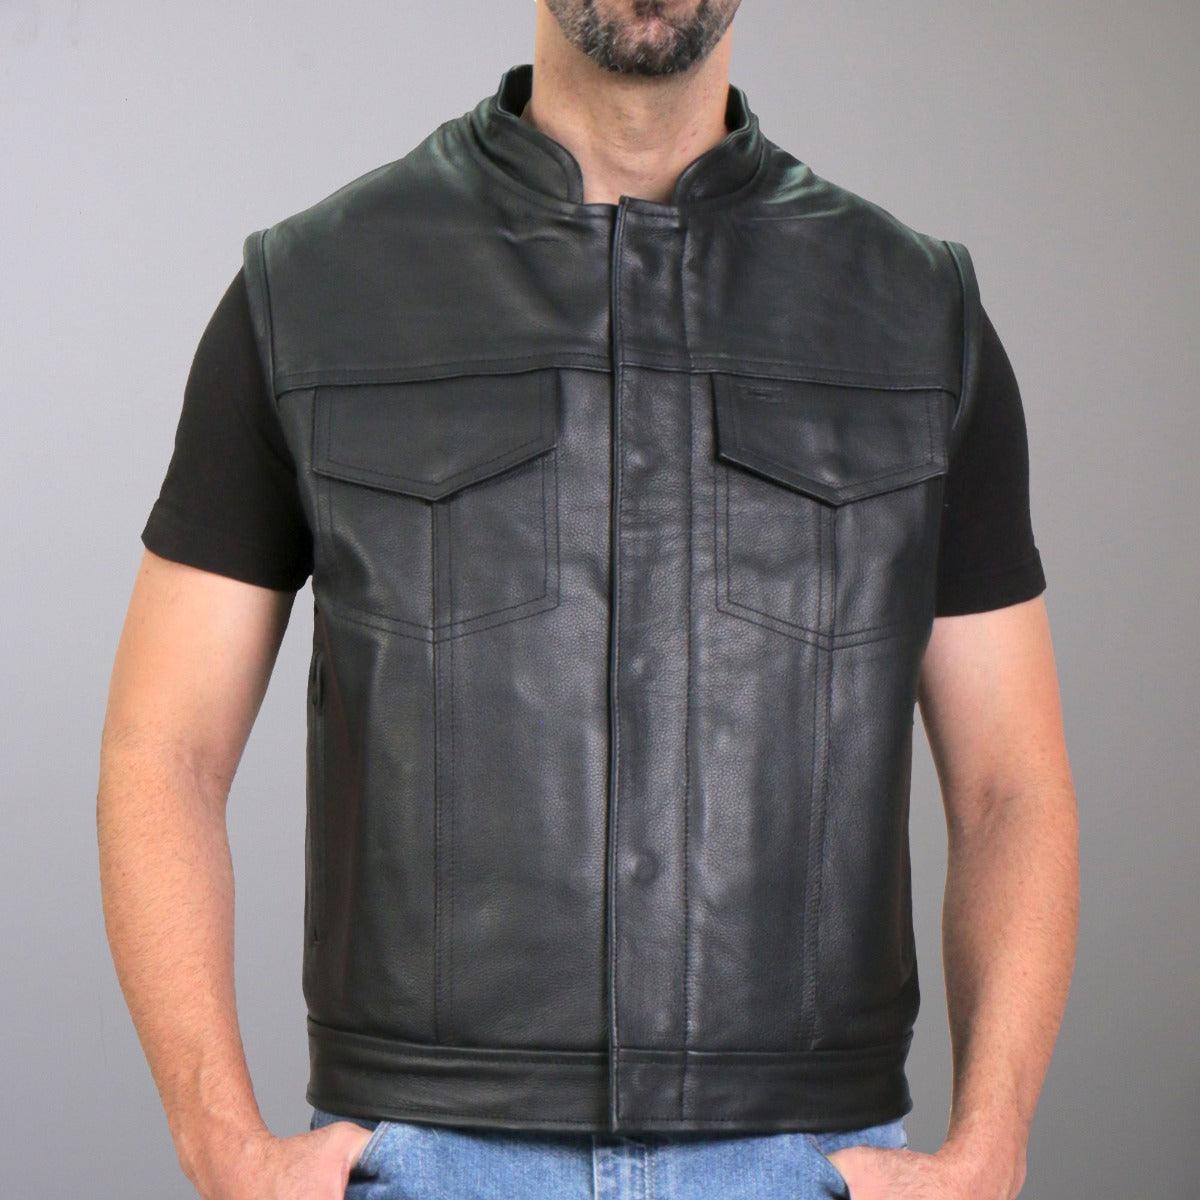 Hot Leathers Vest Paisley Black Carry Conceal - American Legend Rider